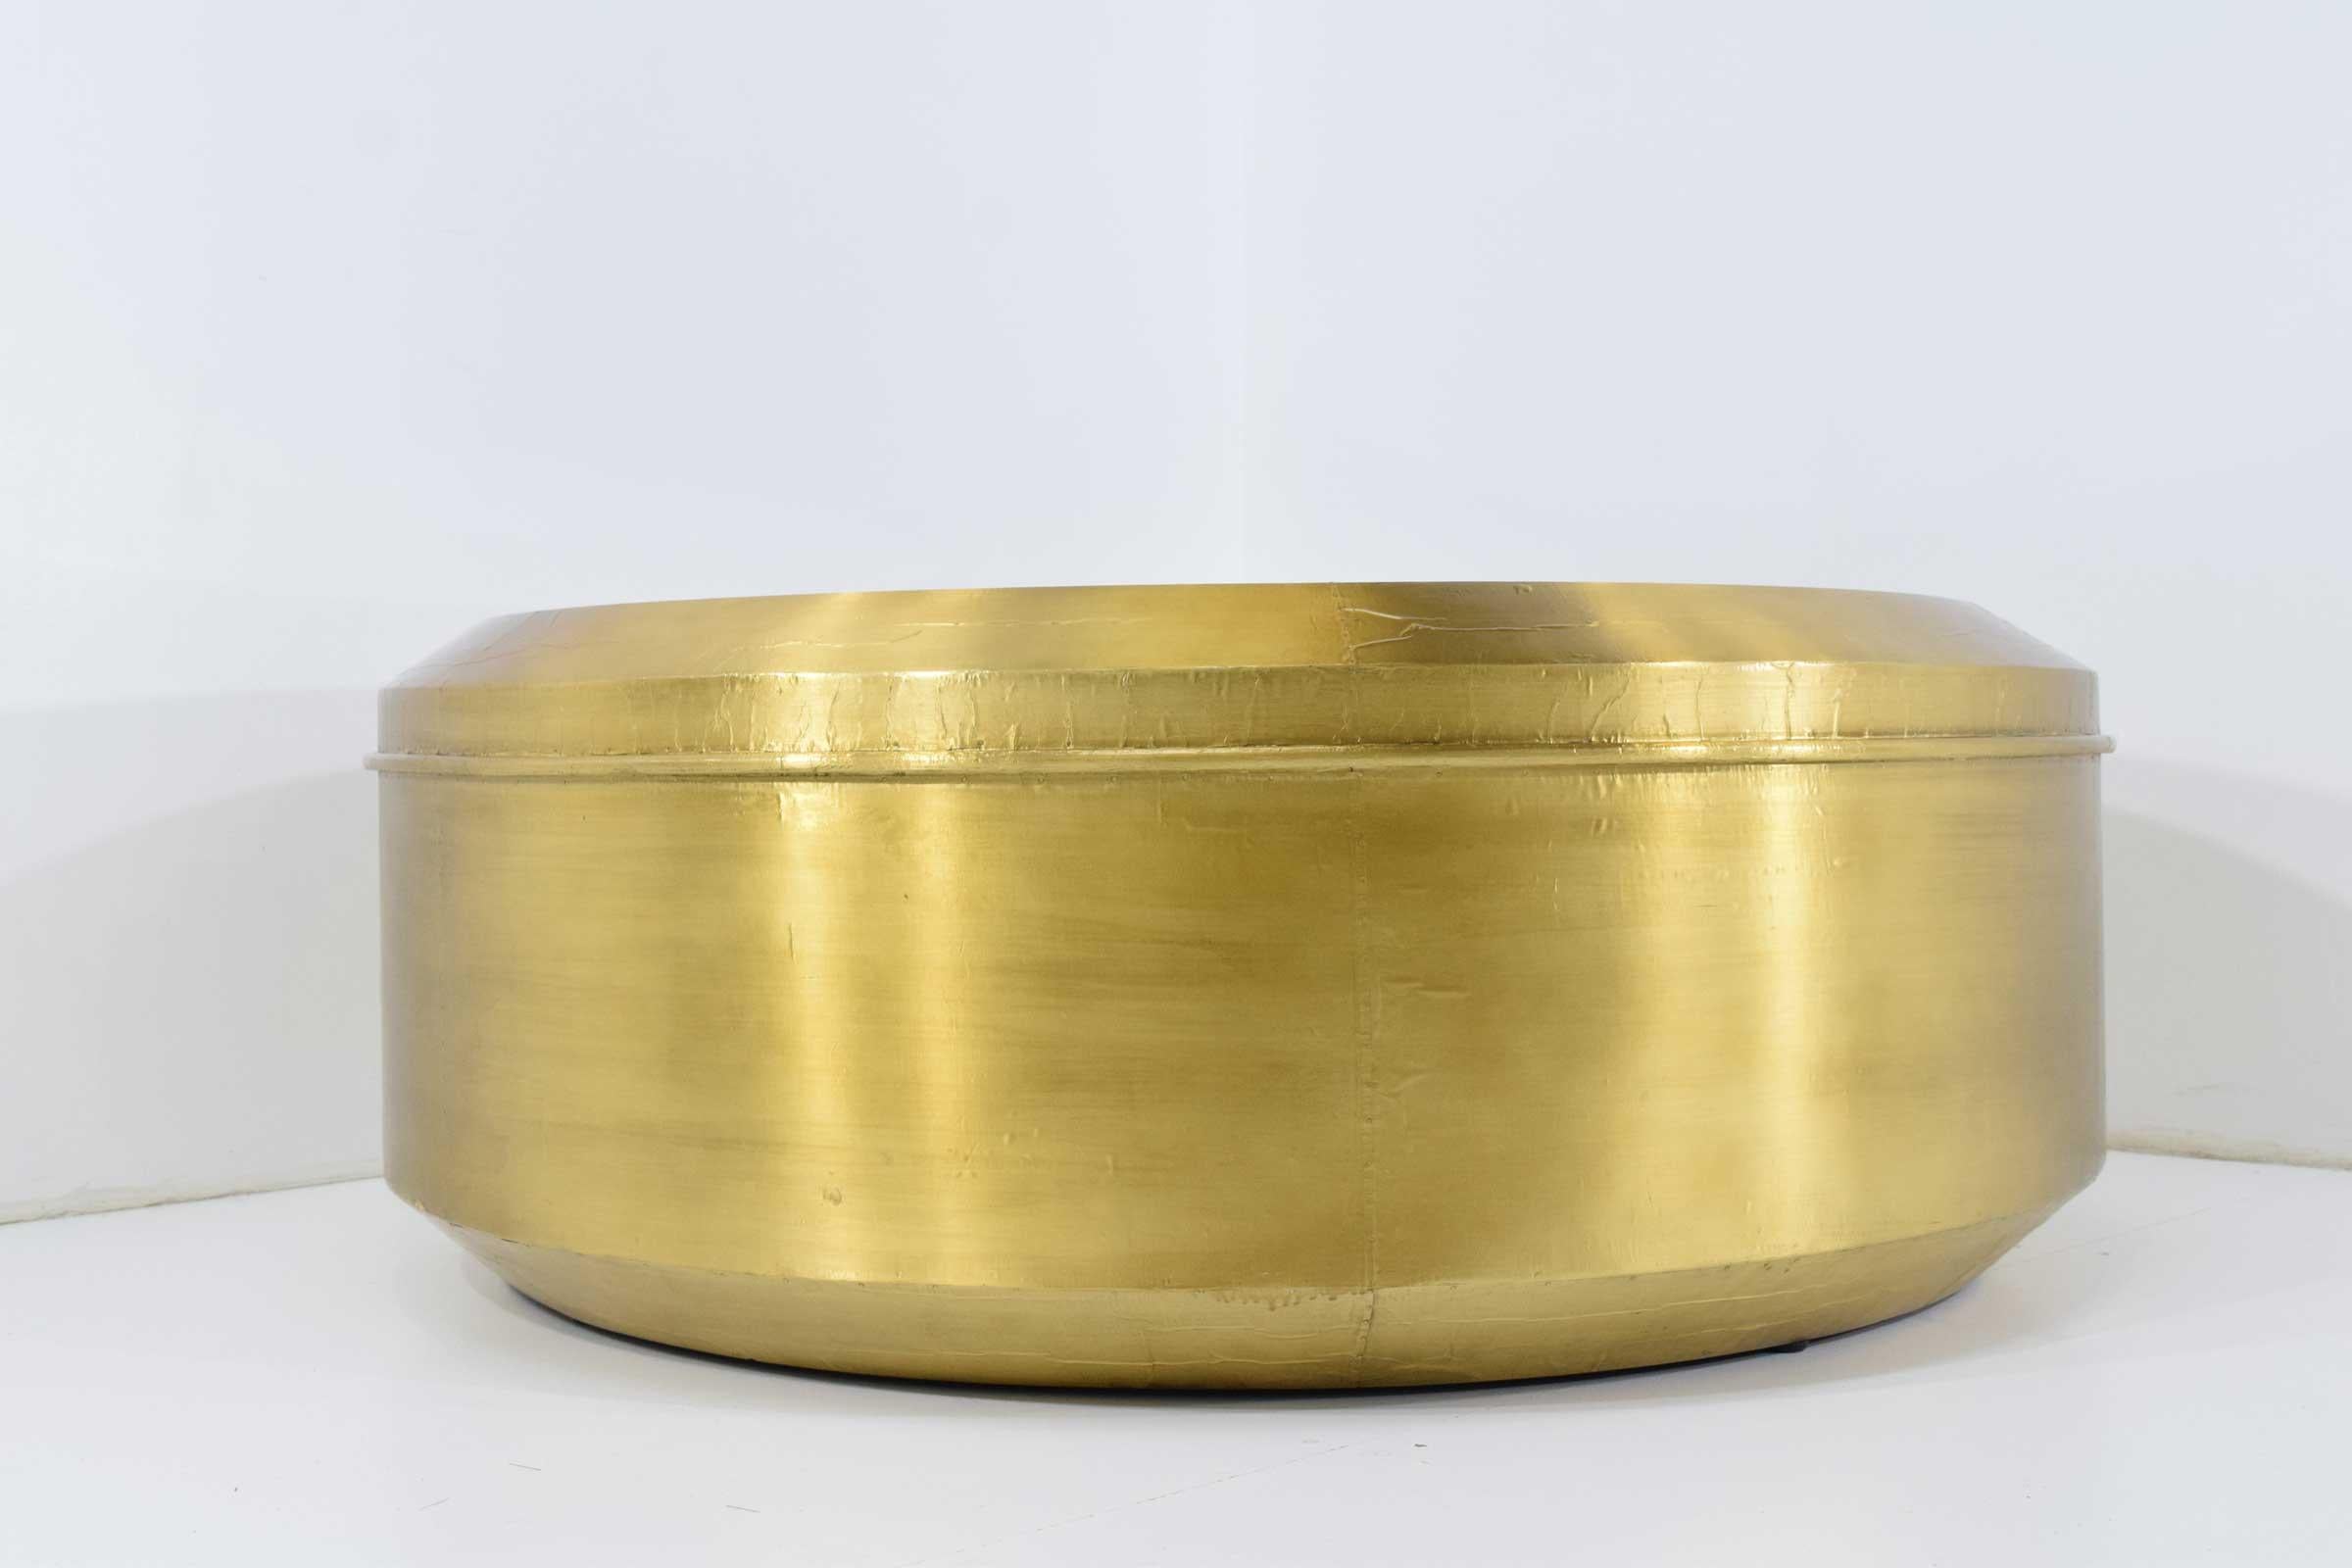 The Carnaby round cocktail table by Bernhardt has a metal base in a patinated gold leaf brass finish and an inset tempered smoked glass top over a black painted panel.